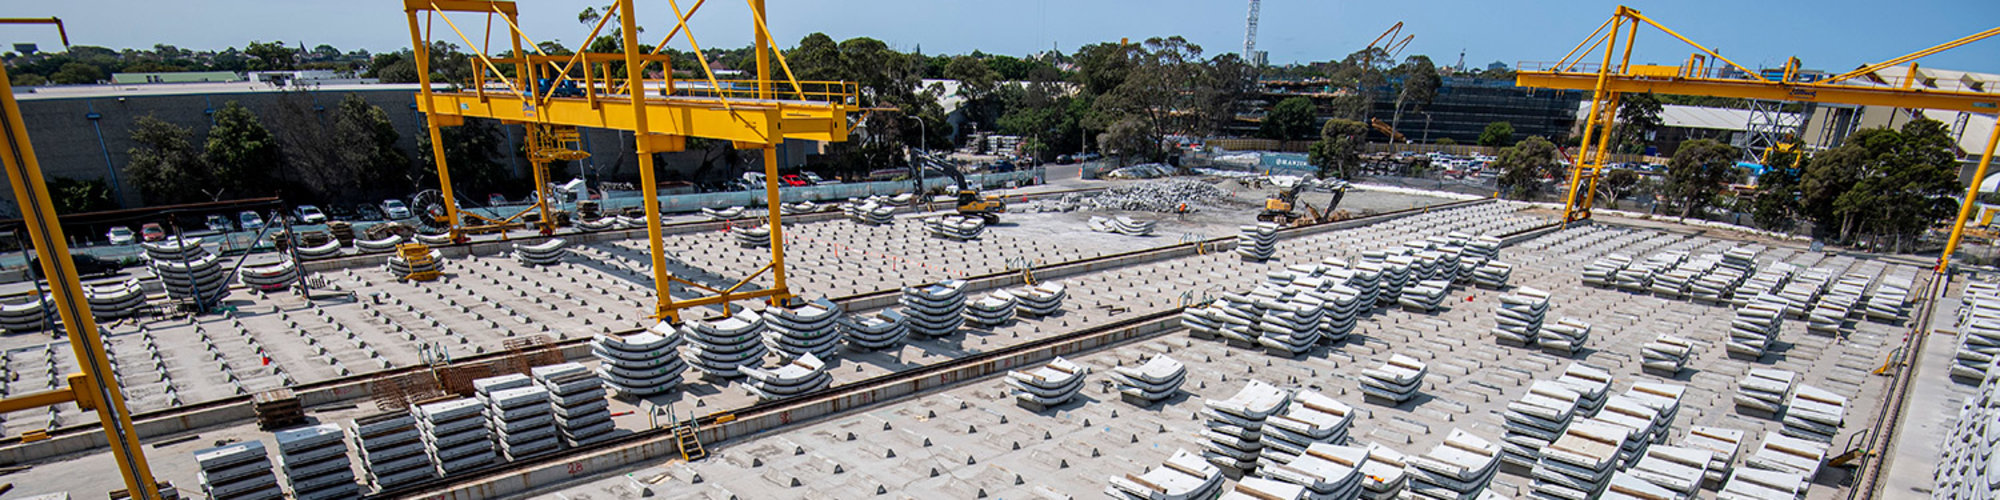 Aerial shot of the Marrickville precast facility yard that stored tunnel segments